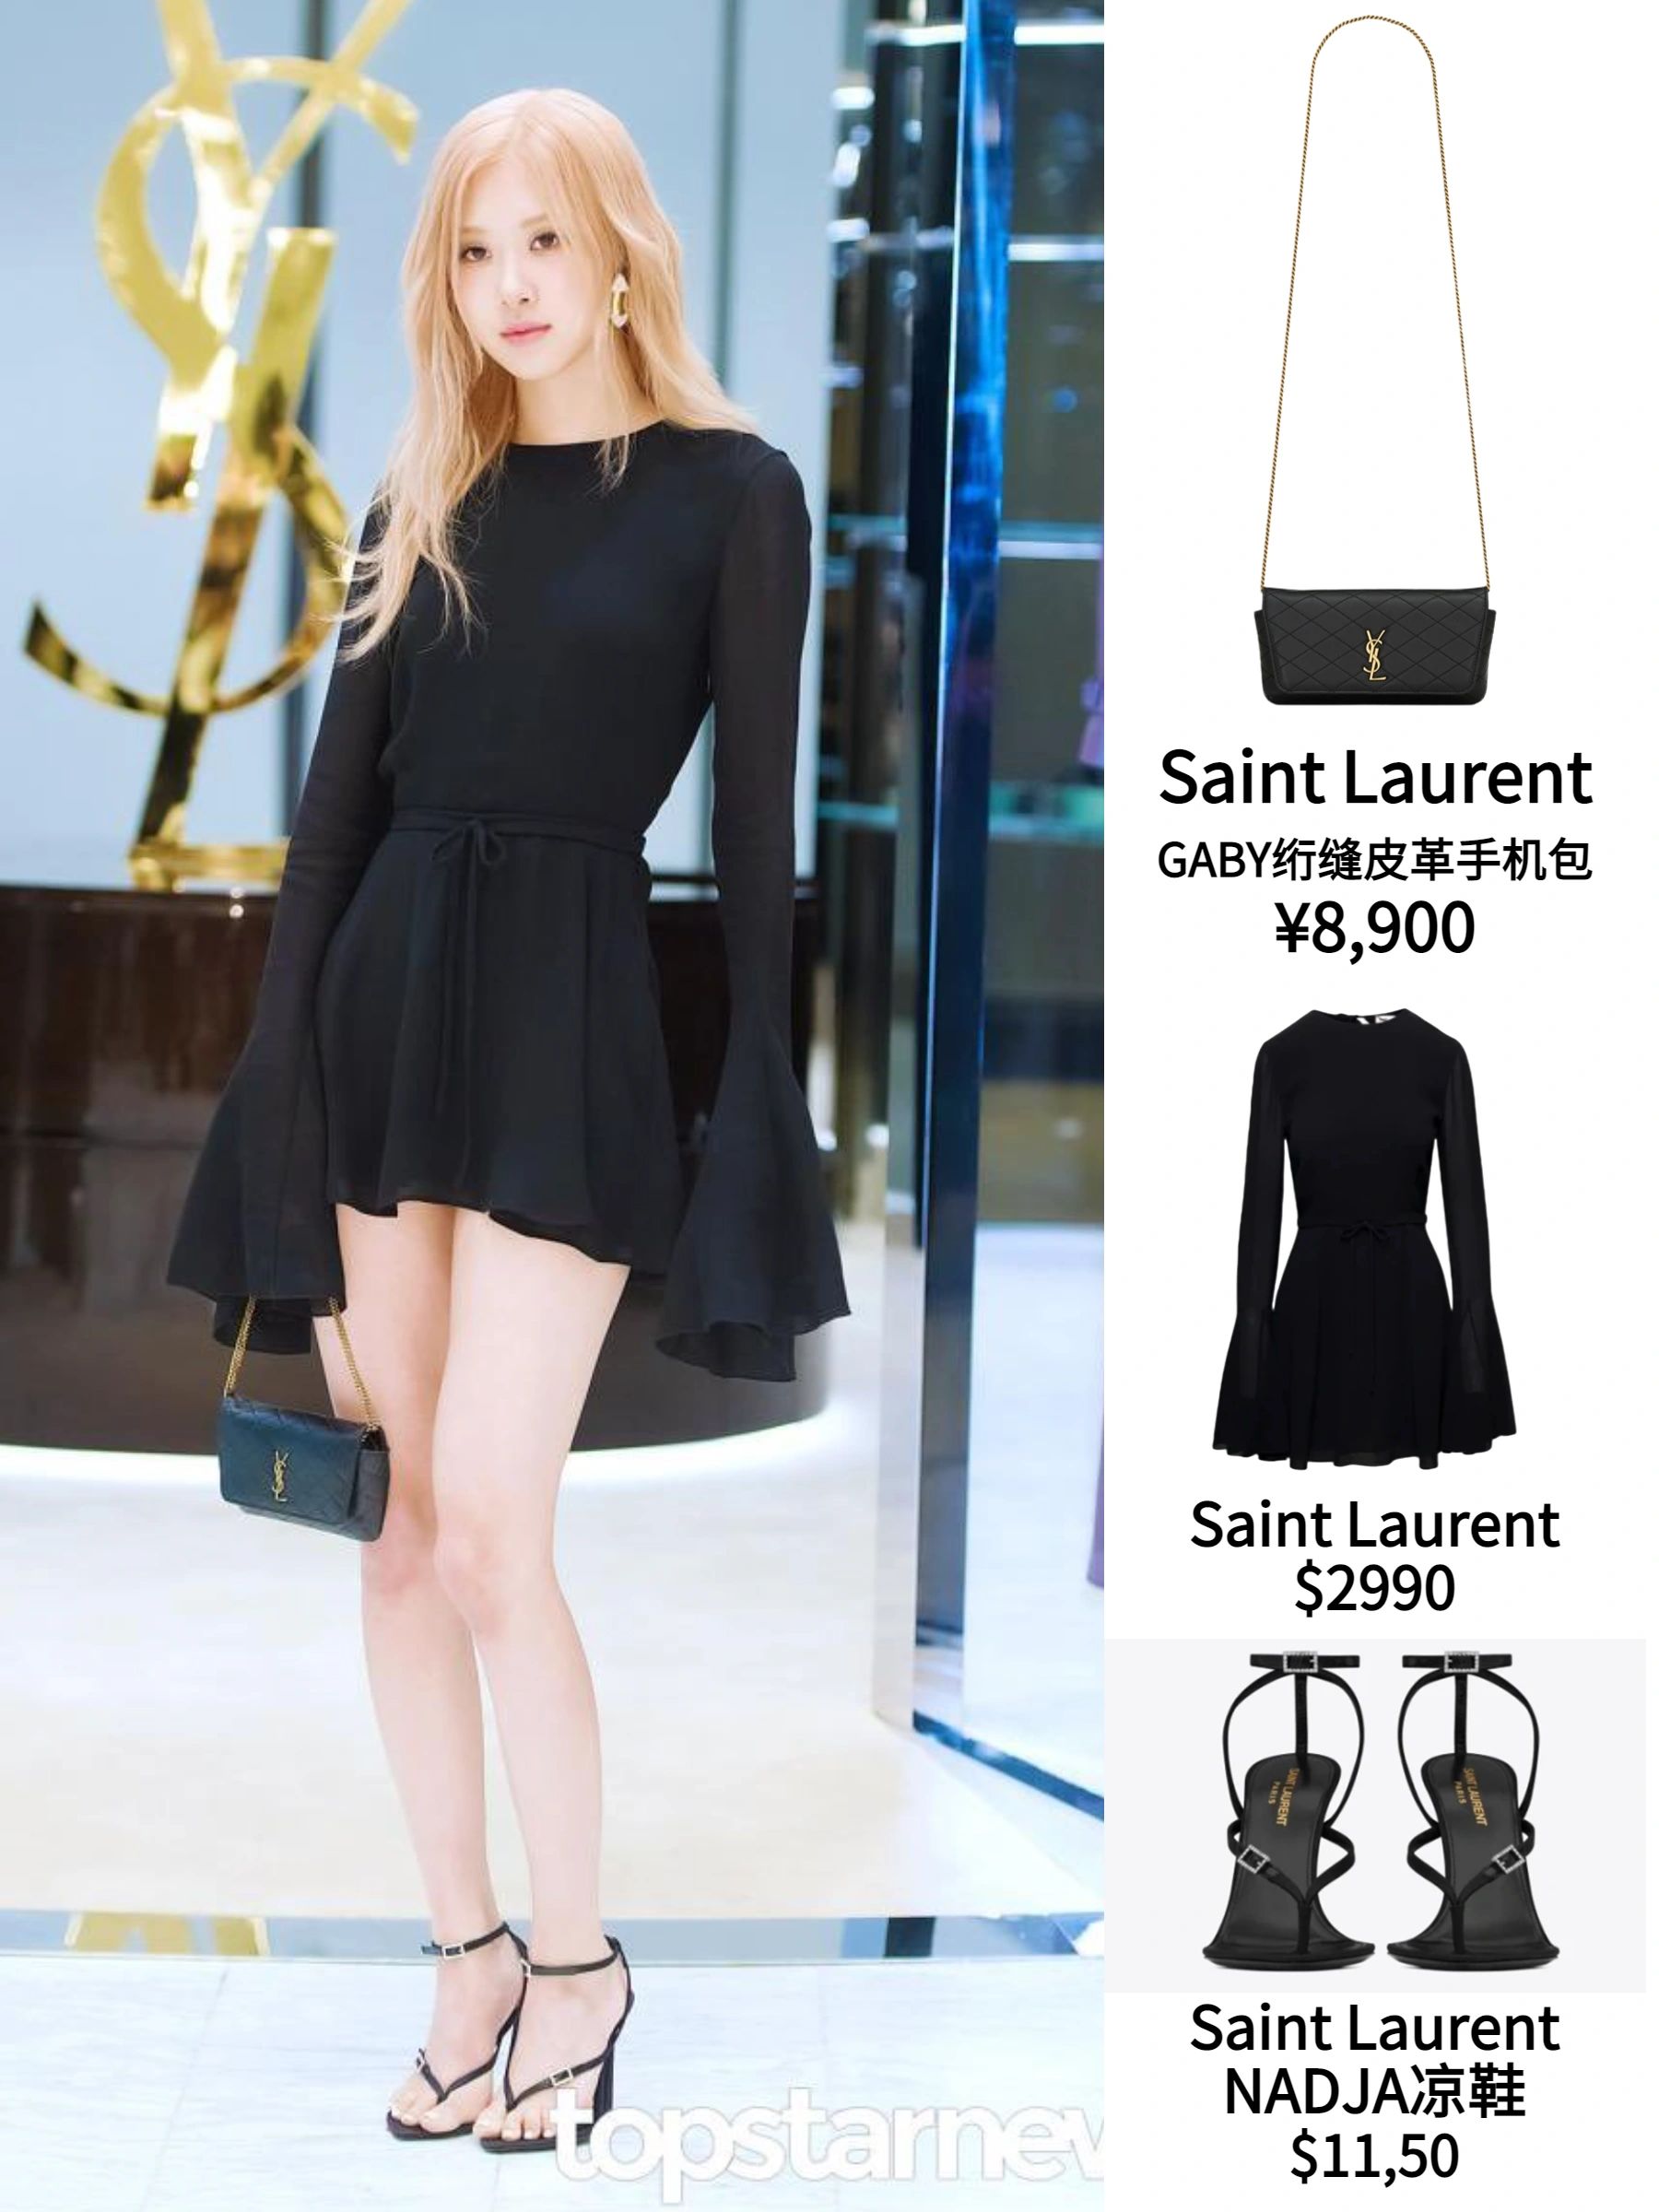 Park Chae-young YSL pop-up store event in Seoul - iNEWS